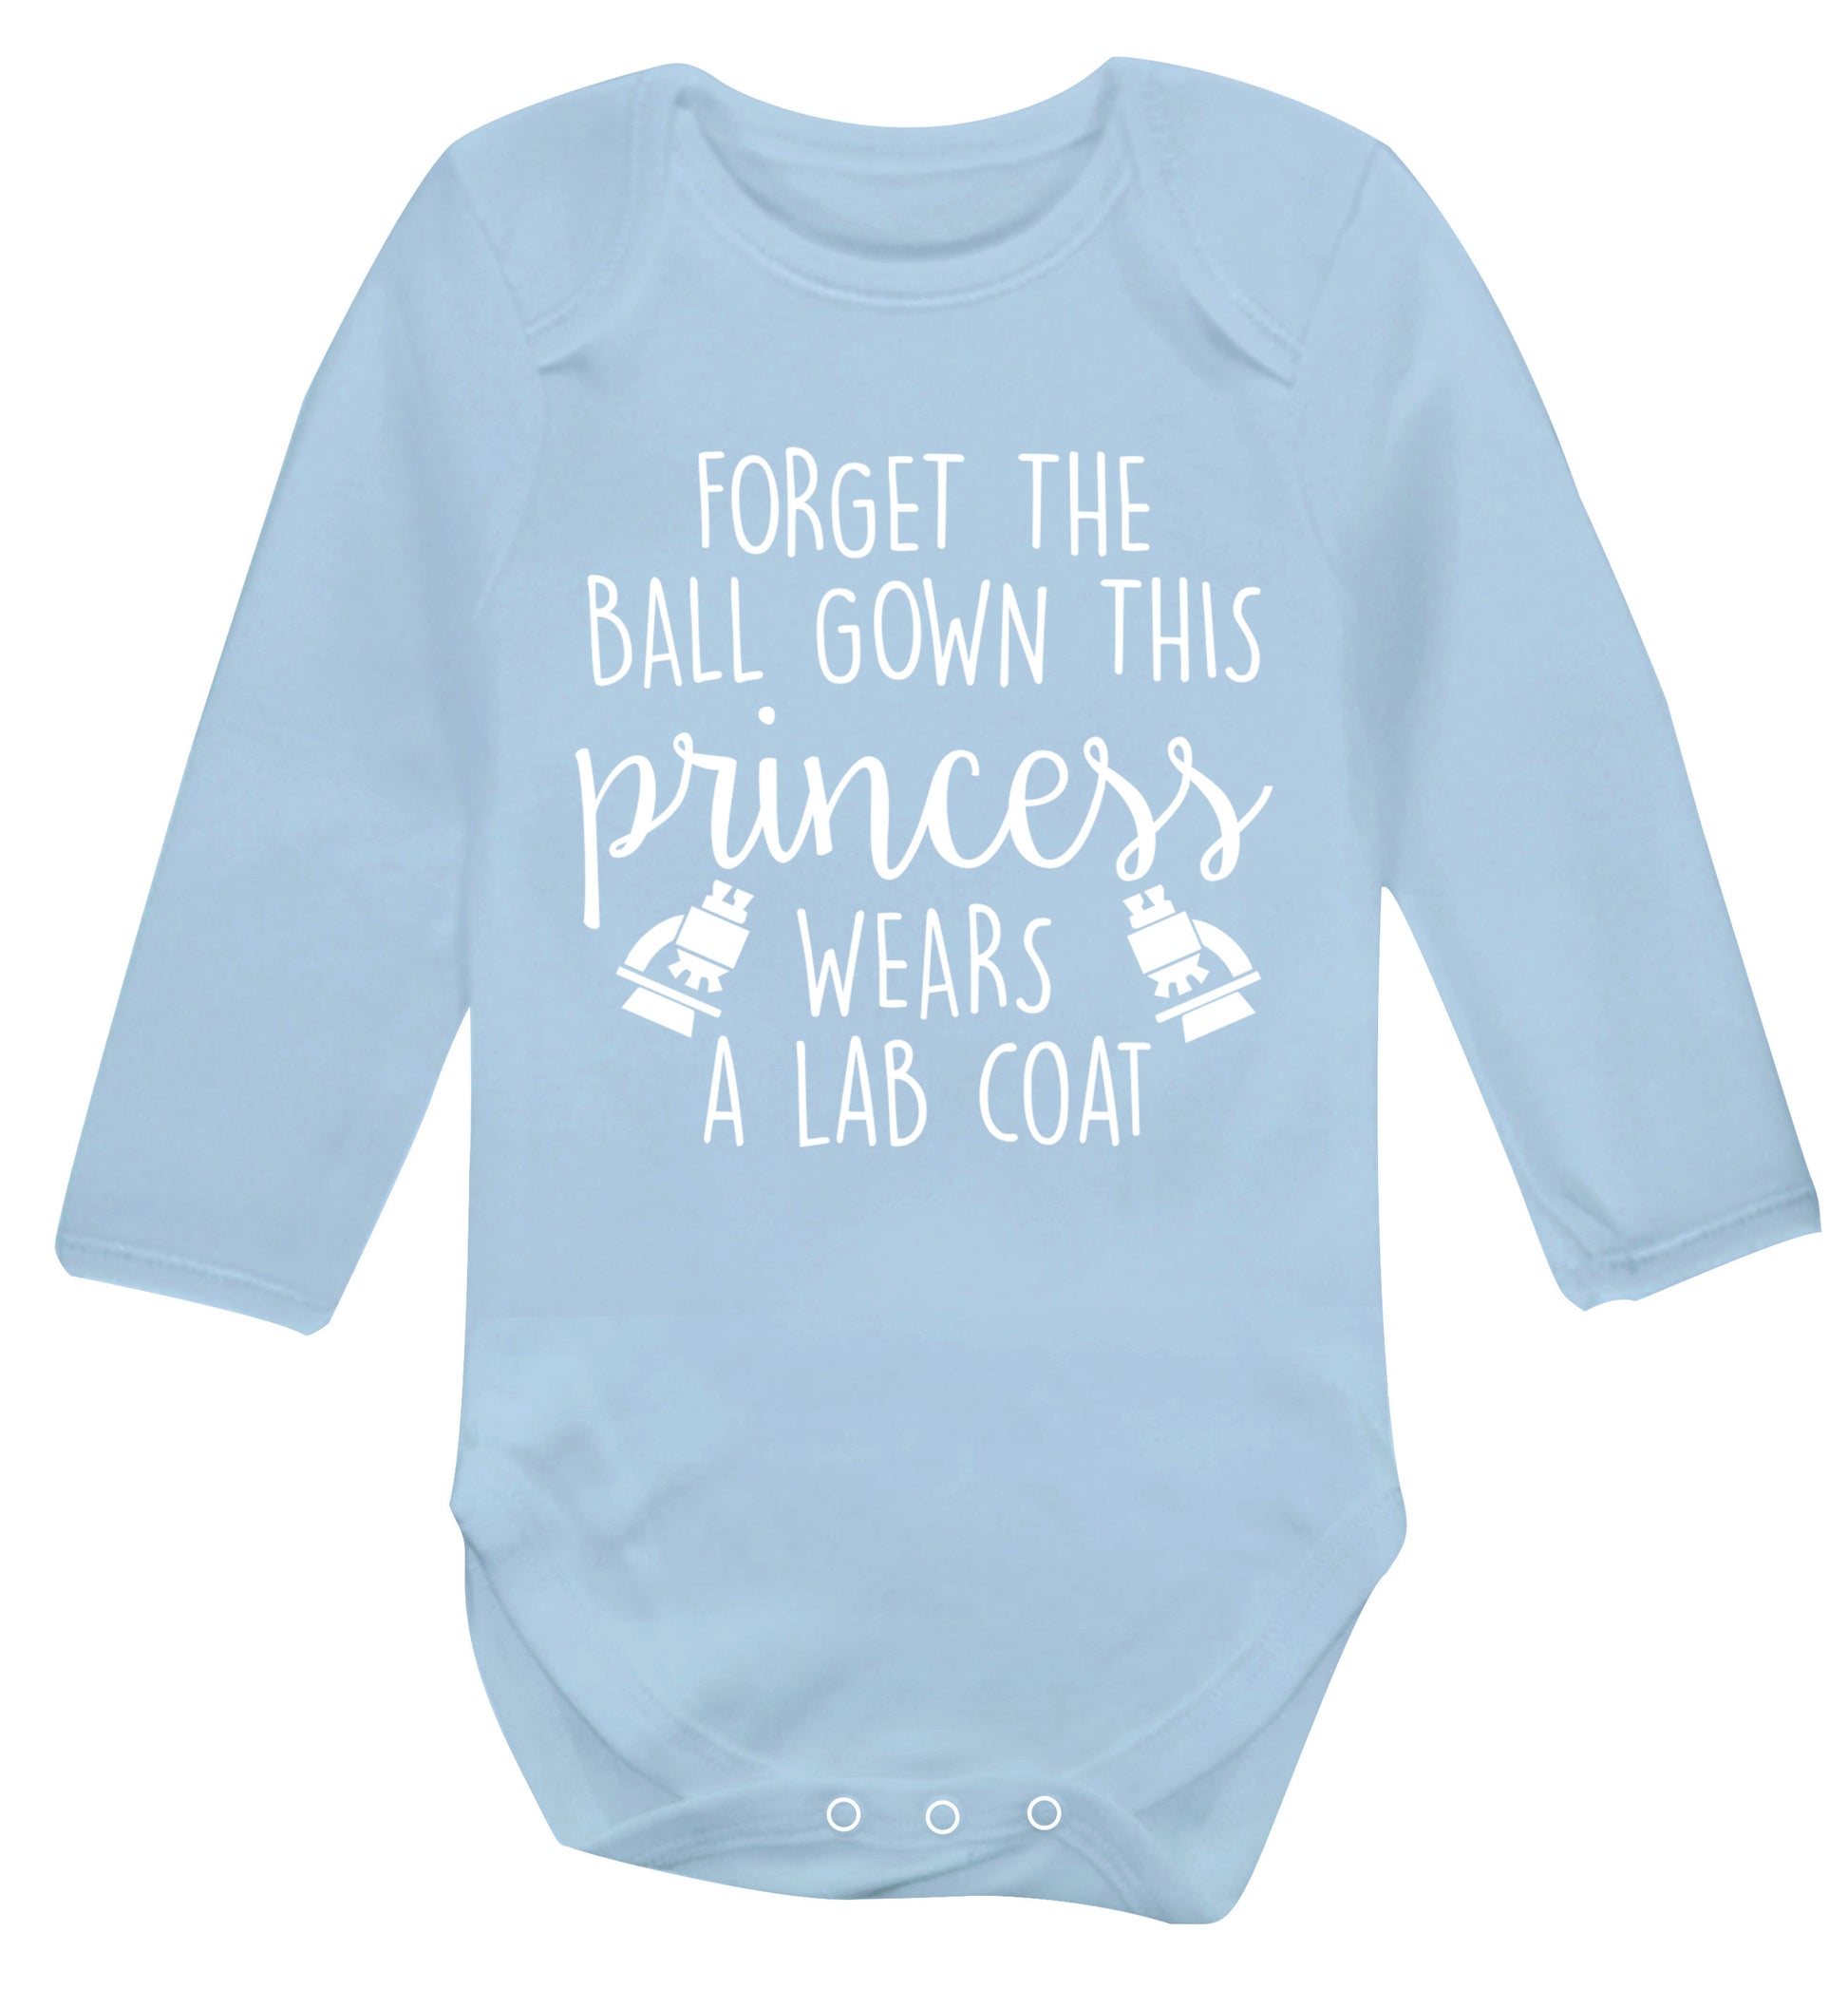 Forget the ball gown this princess wears a lab coat Baby Vest long sleeved pale blue 6-12 months